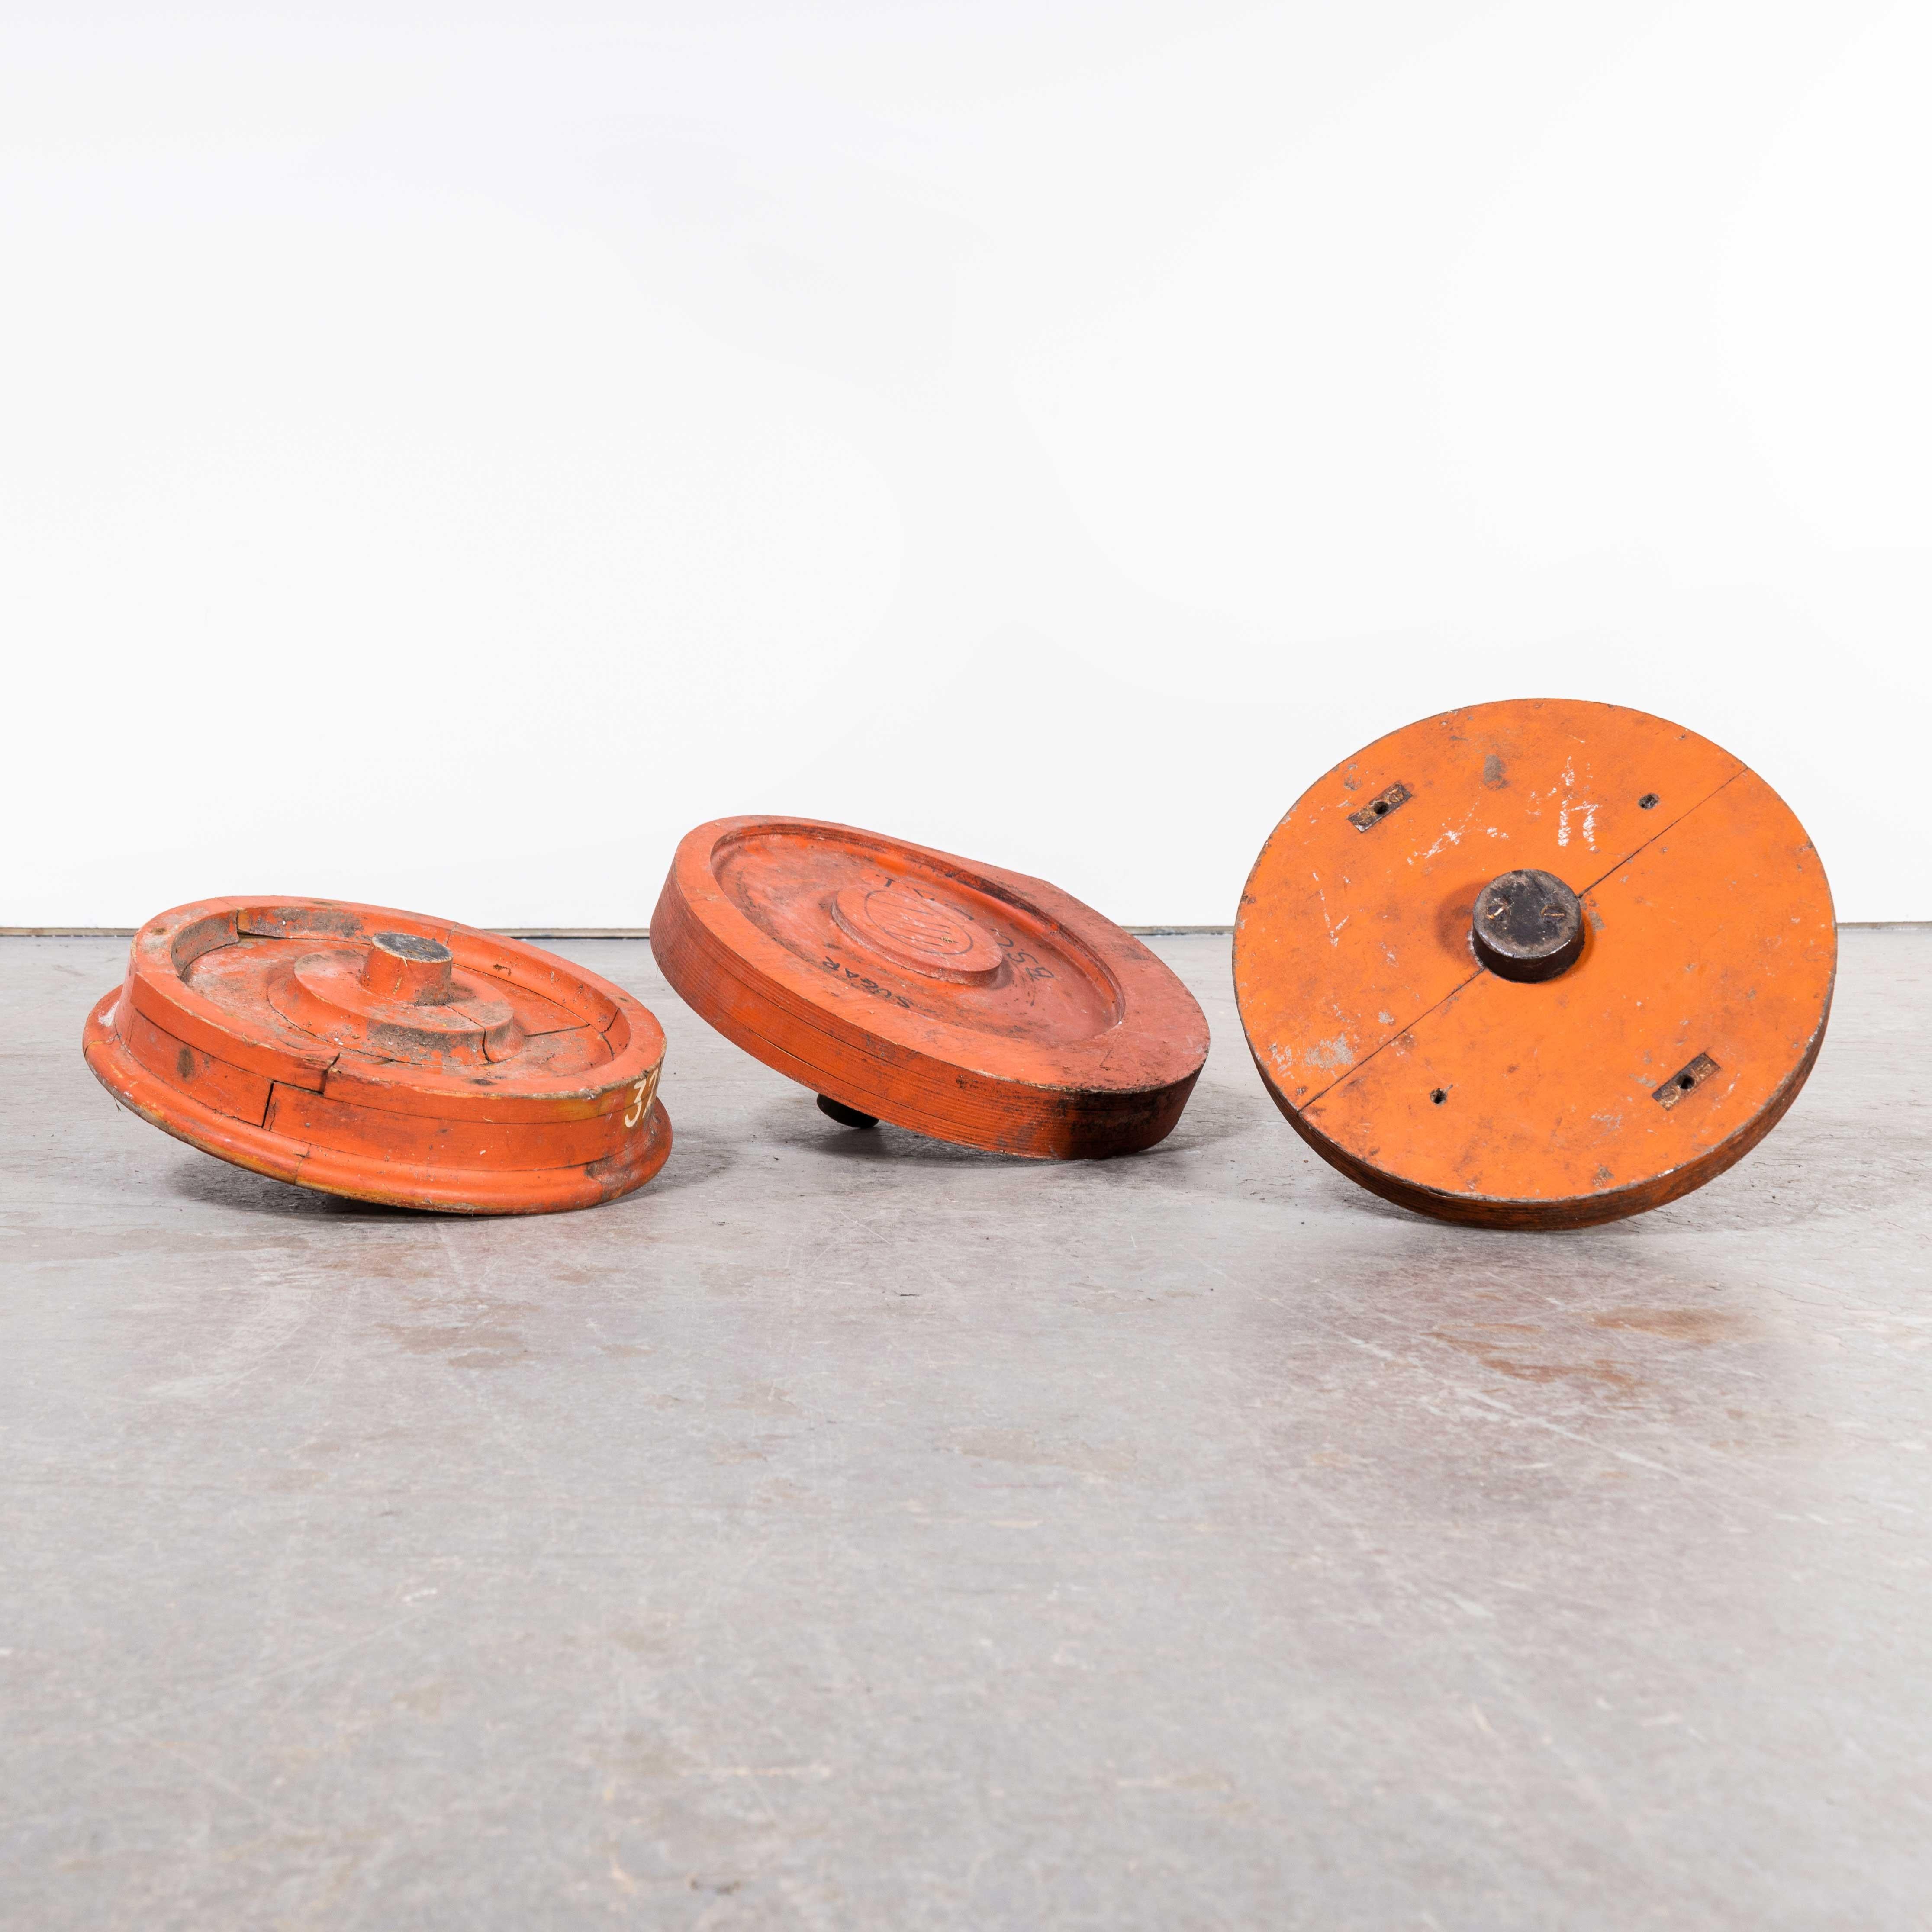 1960’s Set of industrial casting foundry moulds – (Mould 1080.19)
1960’s Set of industrial casting foundry moulds – (Mould 1080.19). We recently cleared the Victorian warehouses of Derwent Foundry on the river Derwent in Derbyshire. These amazing